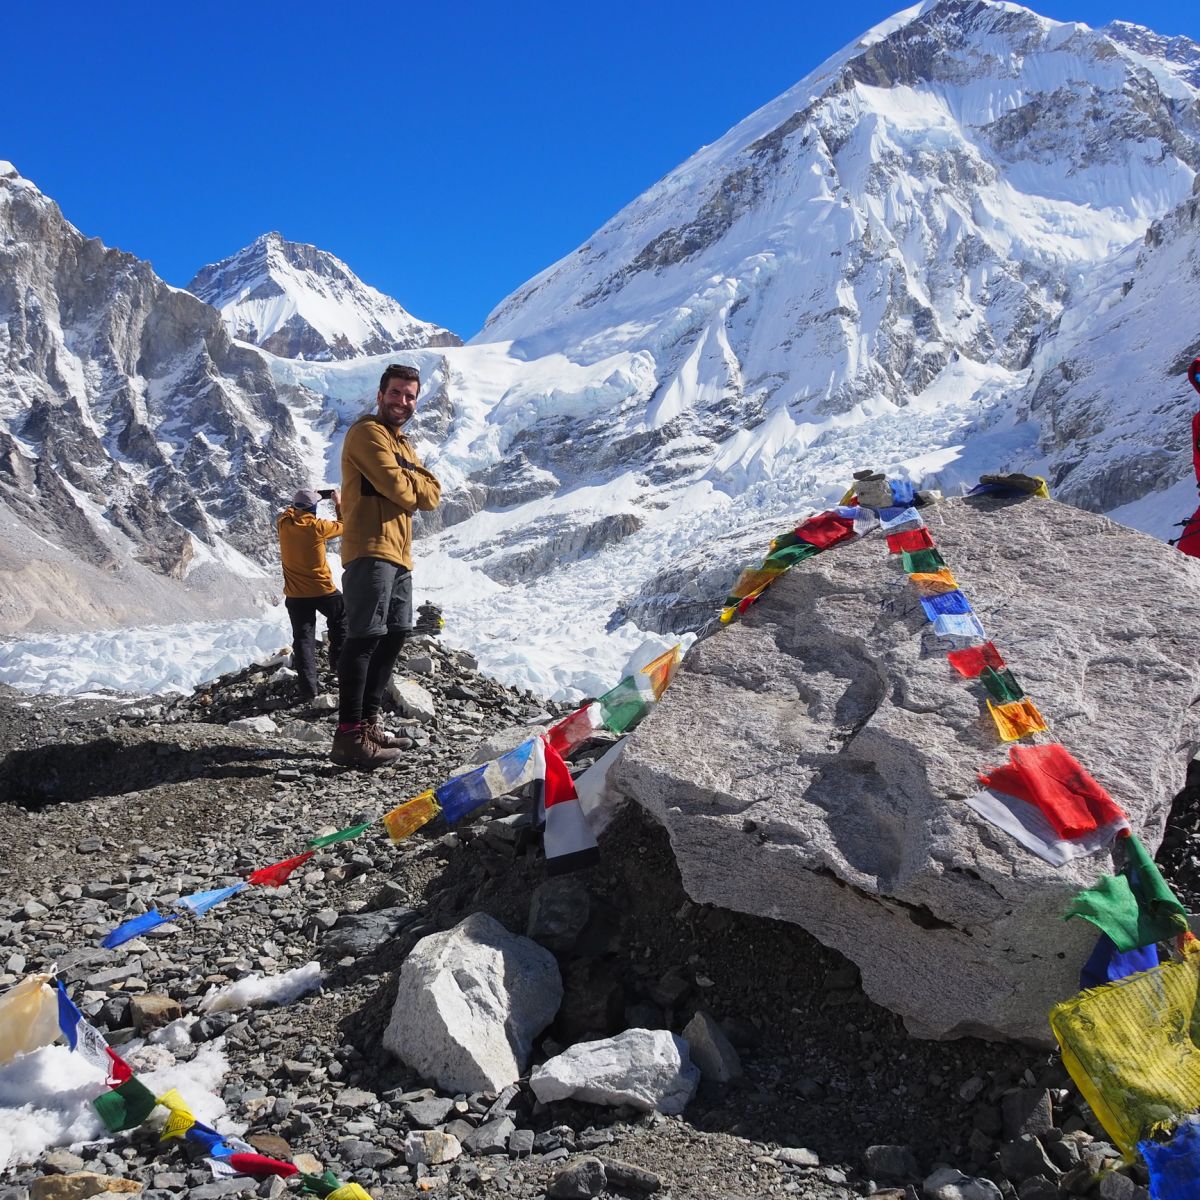 Everest Base Camp with flags and trekkers